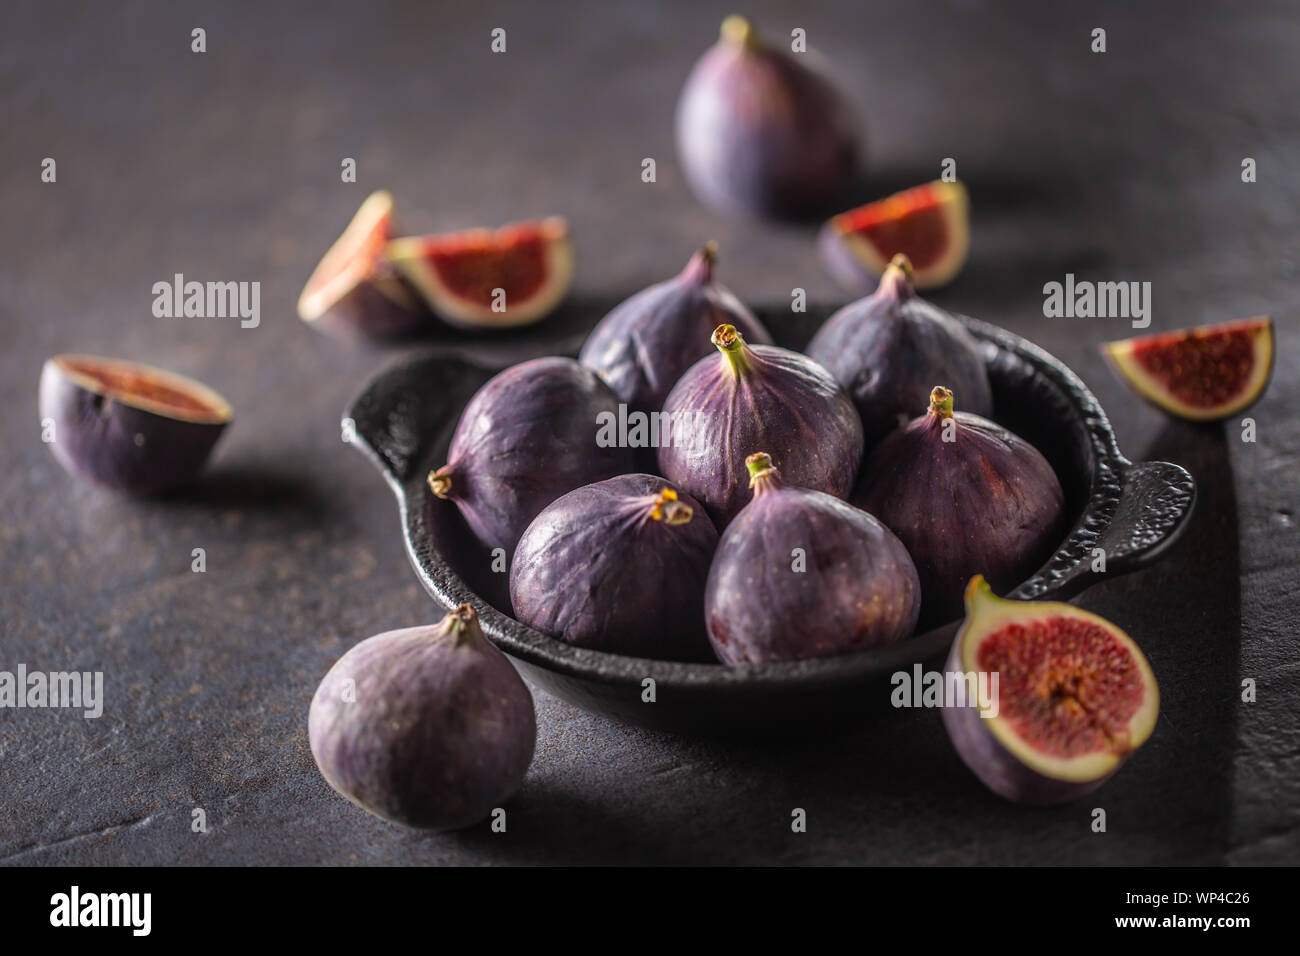 A few figs in a black bowl on an dark concrete table Stock Photo